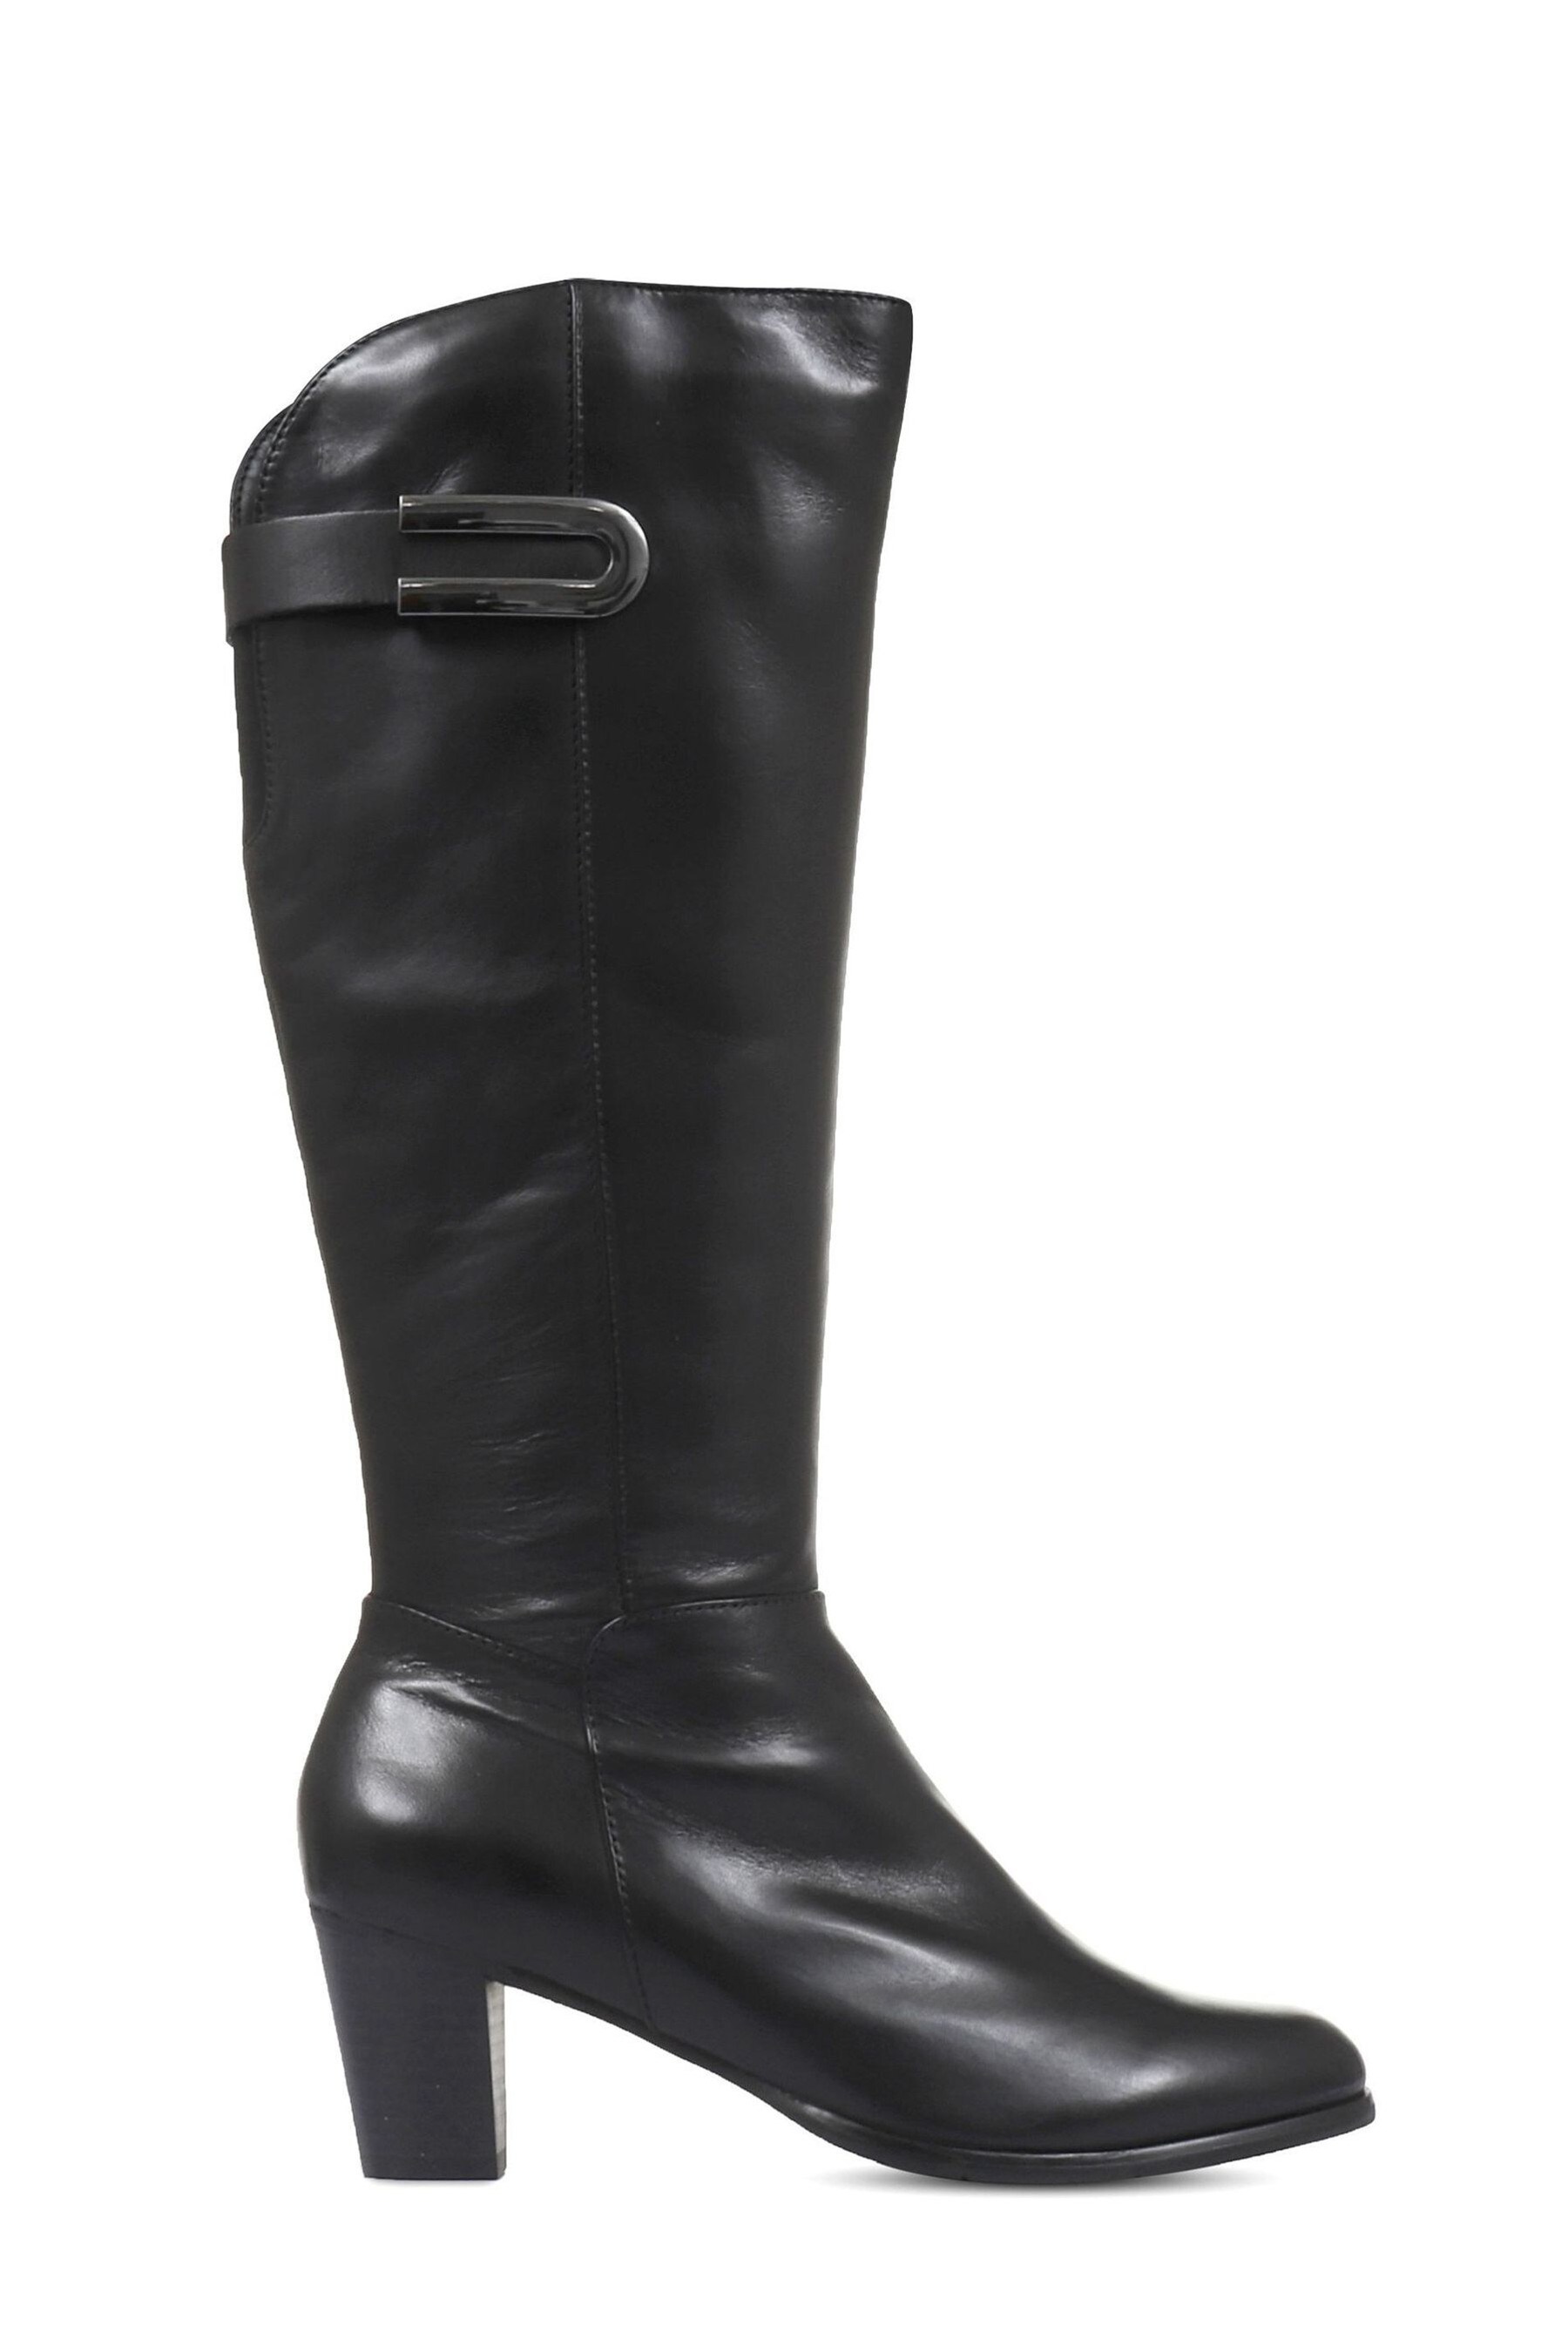 Buy Regarde Le Ciel Sonia 05 Heeled Leather Knee High Boots from the ...